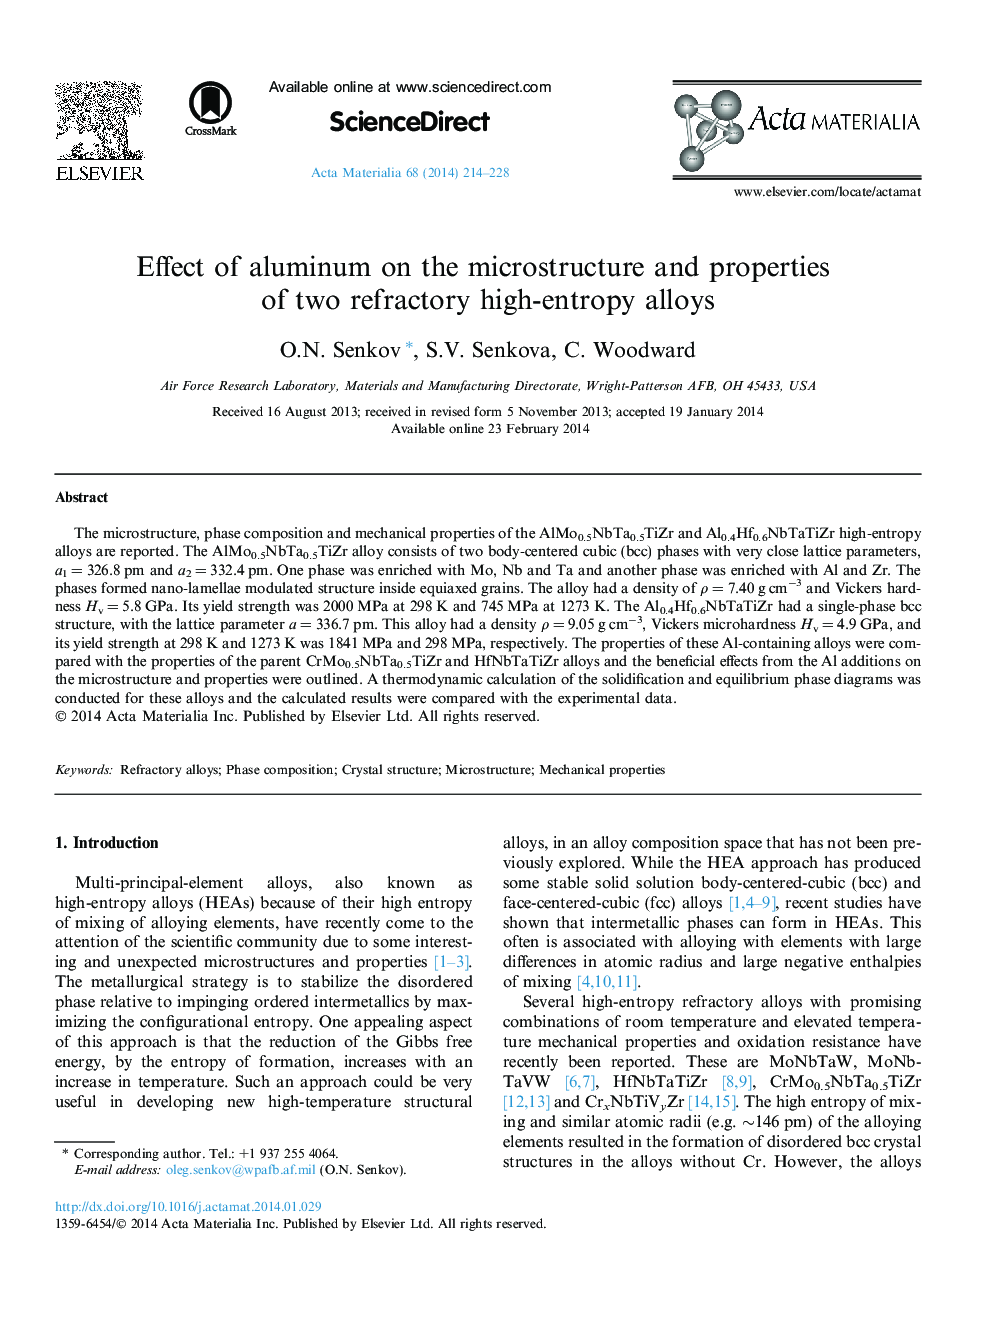 Effect of aluminum on the microstructure and properties of two refractory high-entropy alloys